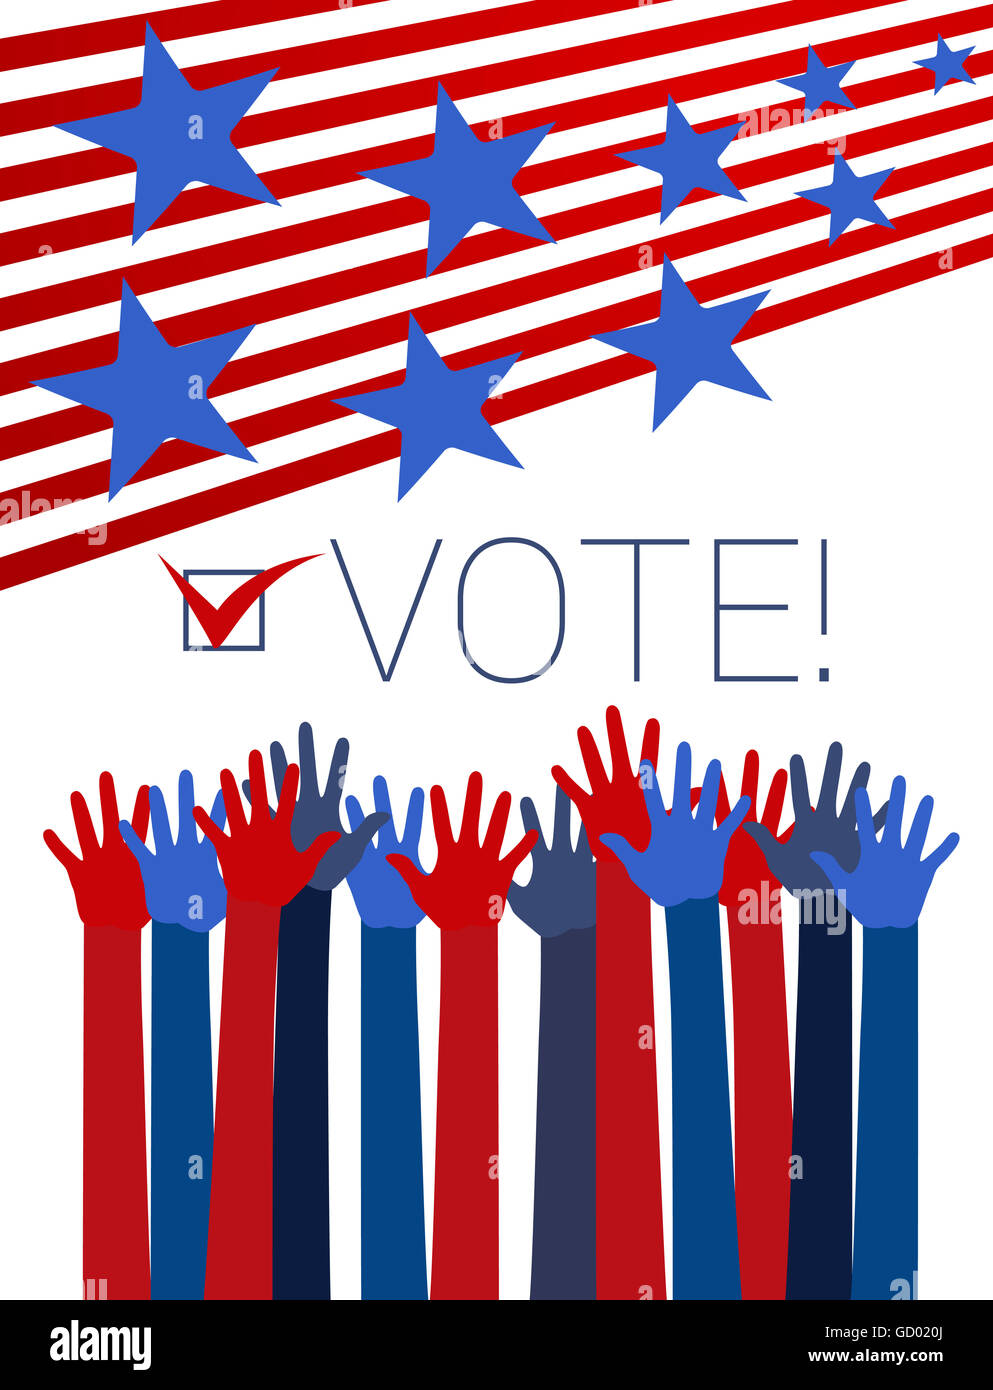 Vote conceptual illustration with raising hands, red stripes and blue stars Stock Photo